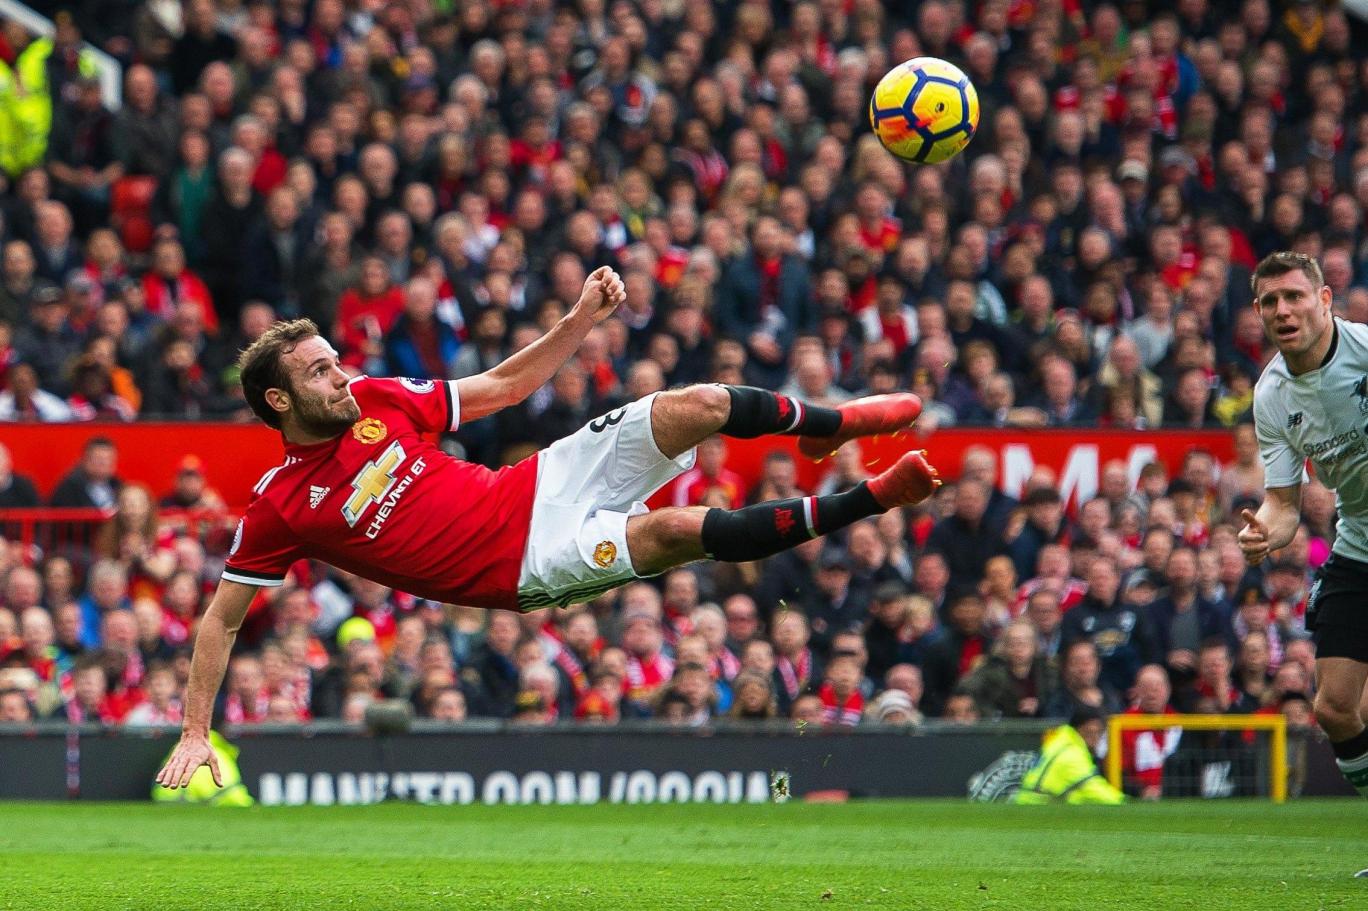 Manchester United star Juan Mata has rejected a multi-million-pound offer from the Middle East